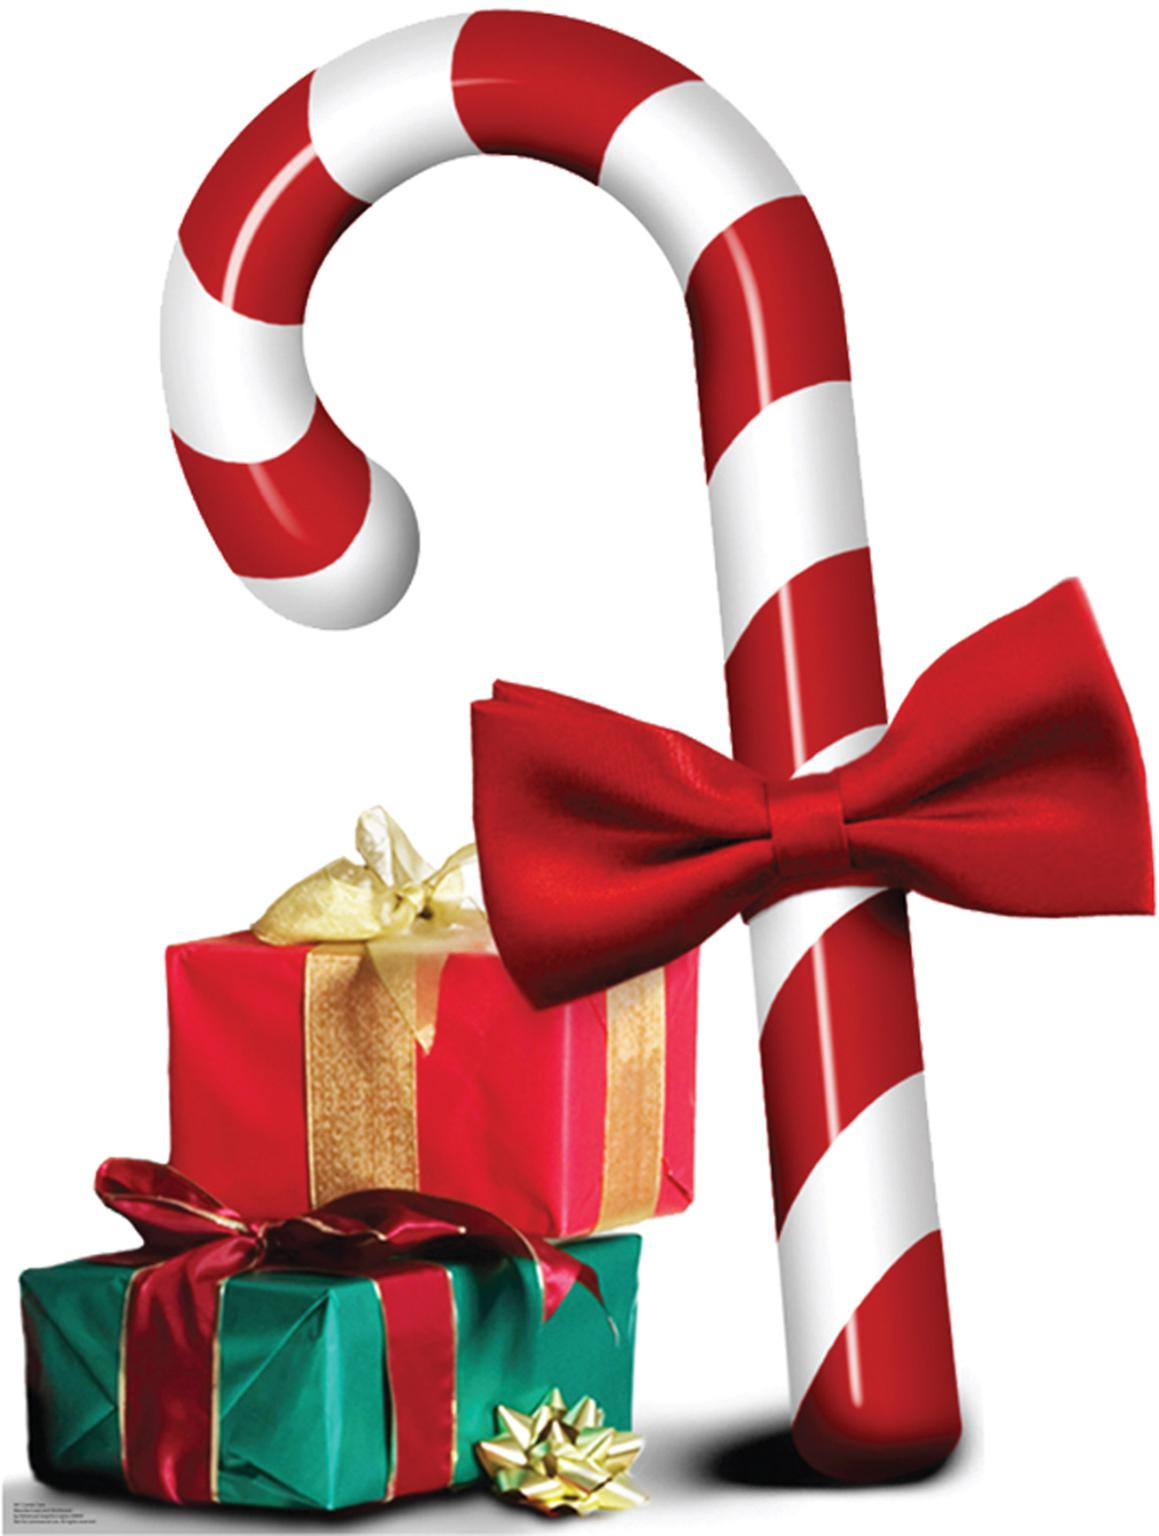 Christmas Candy Cane Images
 Candy Cane Christmas 941